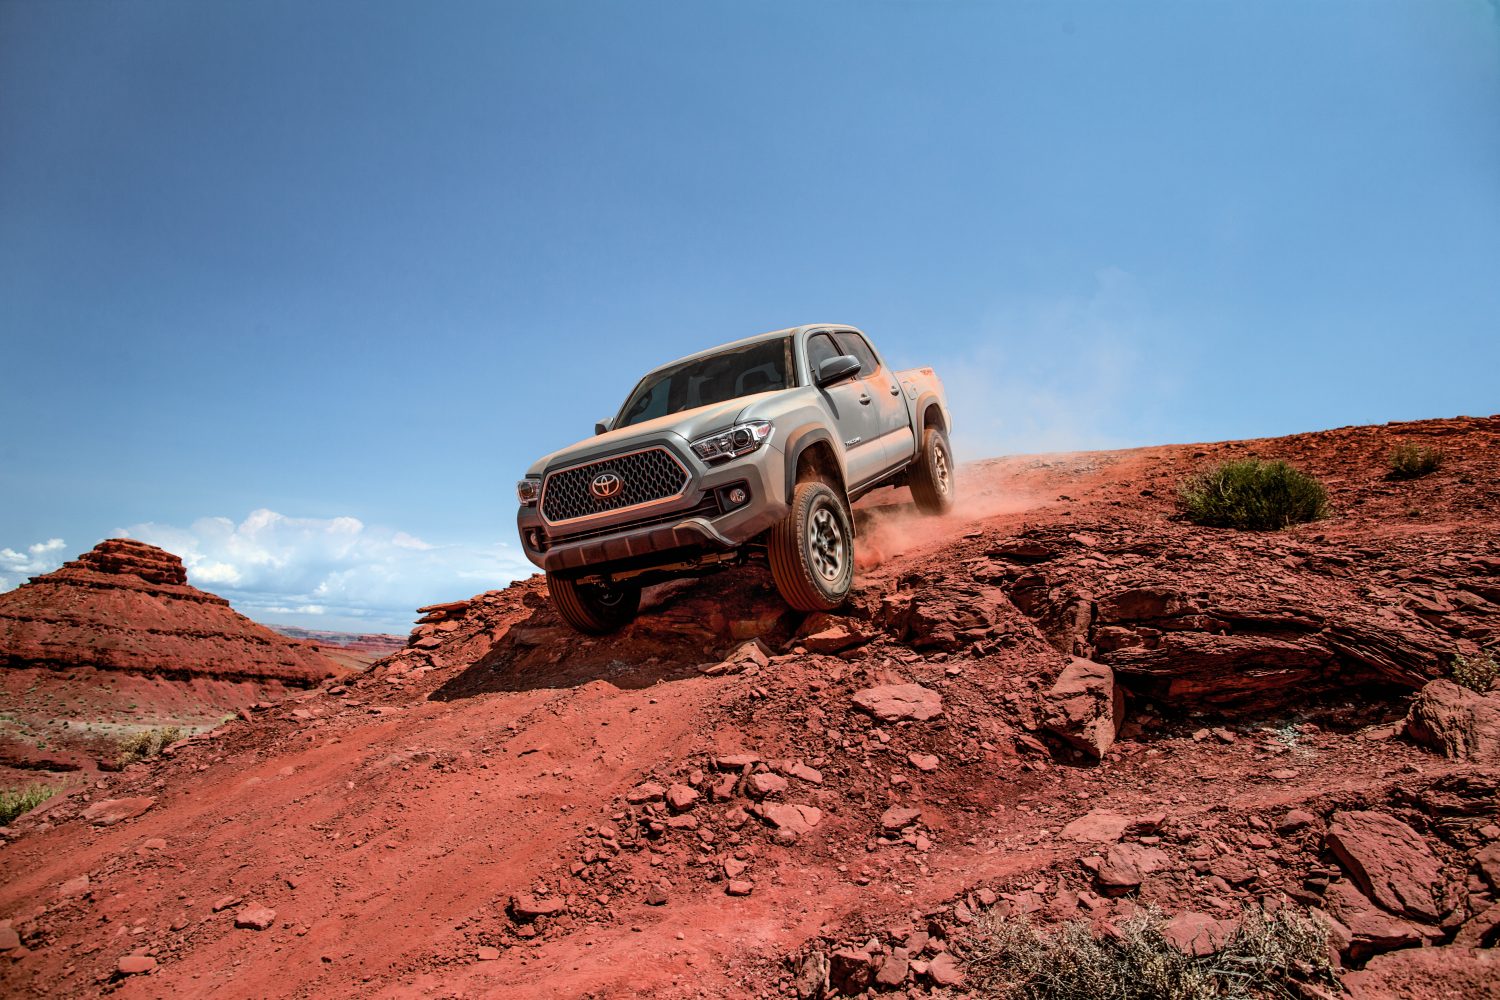 a gray 2018 model year Toyota Tacoma climbing down a sandy red incline on an off-road trail in the desert. 